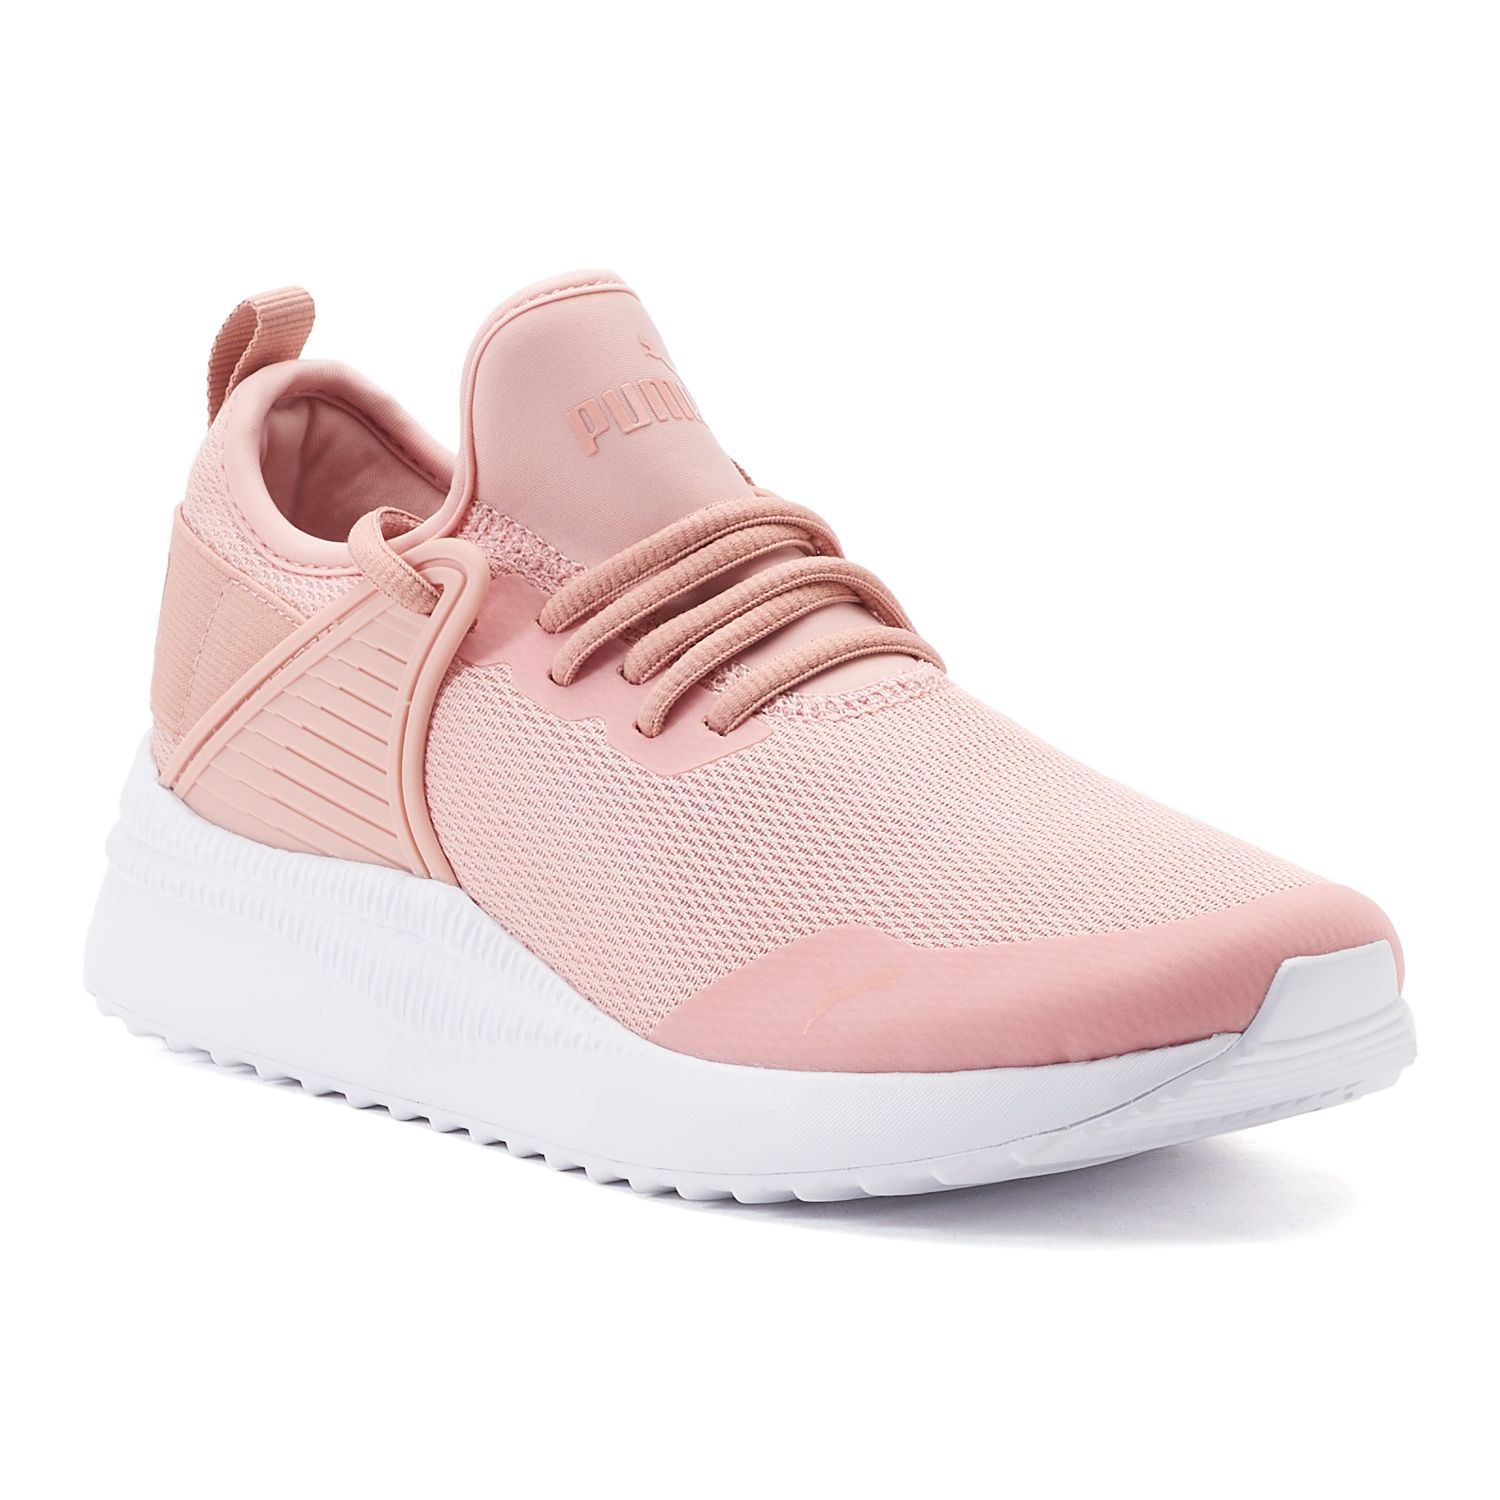 Women's Puma Shoes and Sneakers | Kohl's